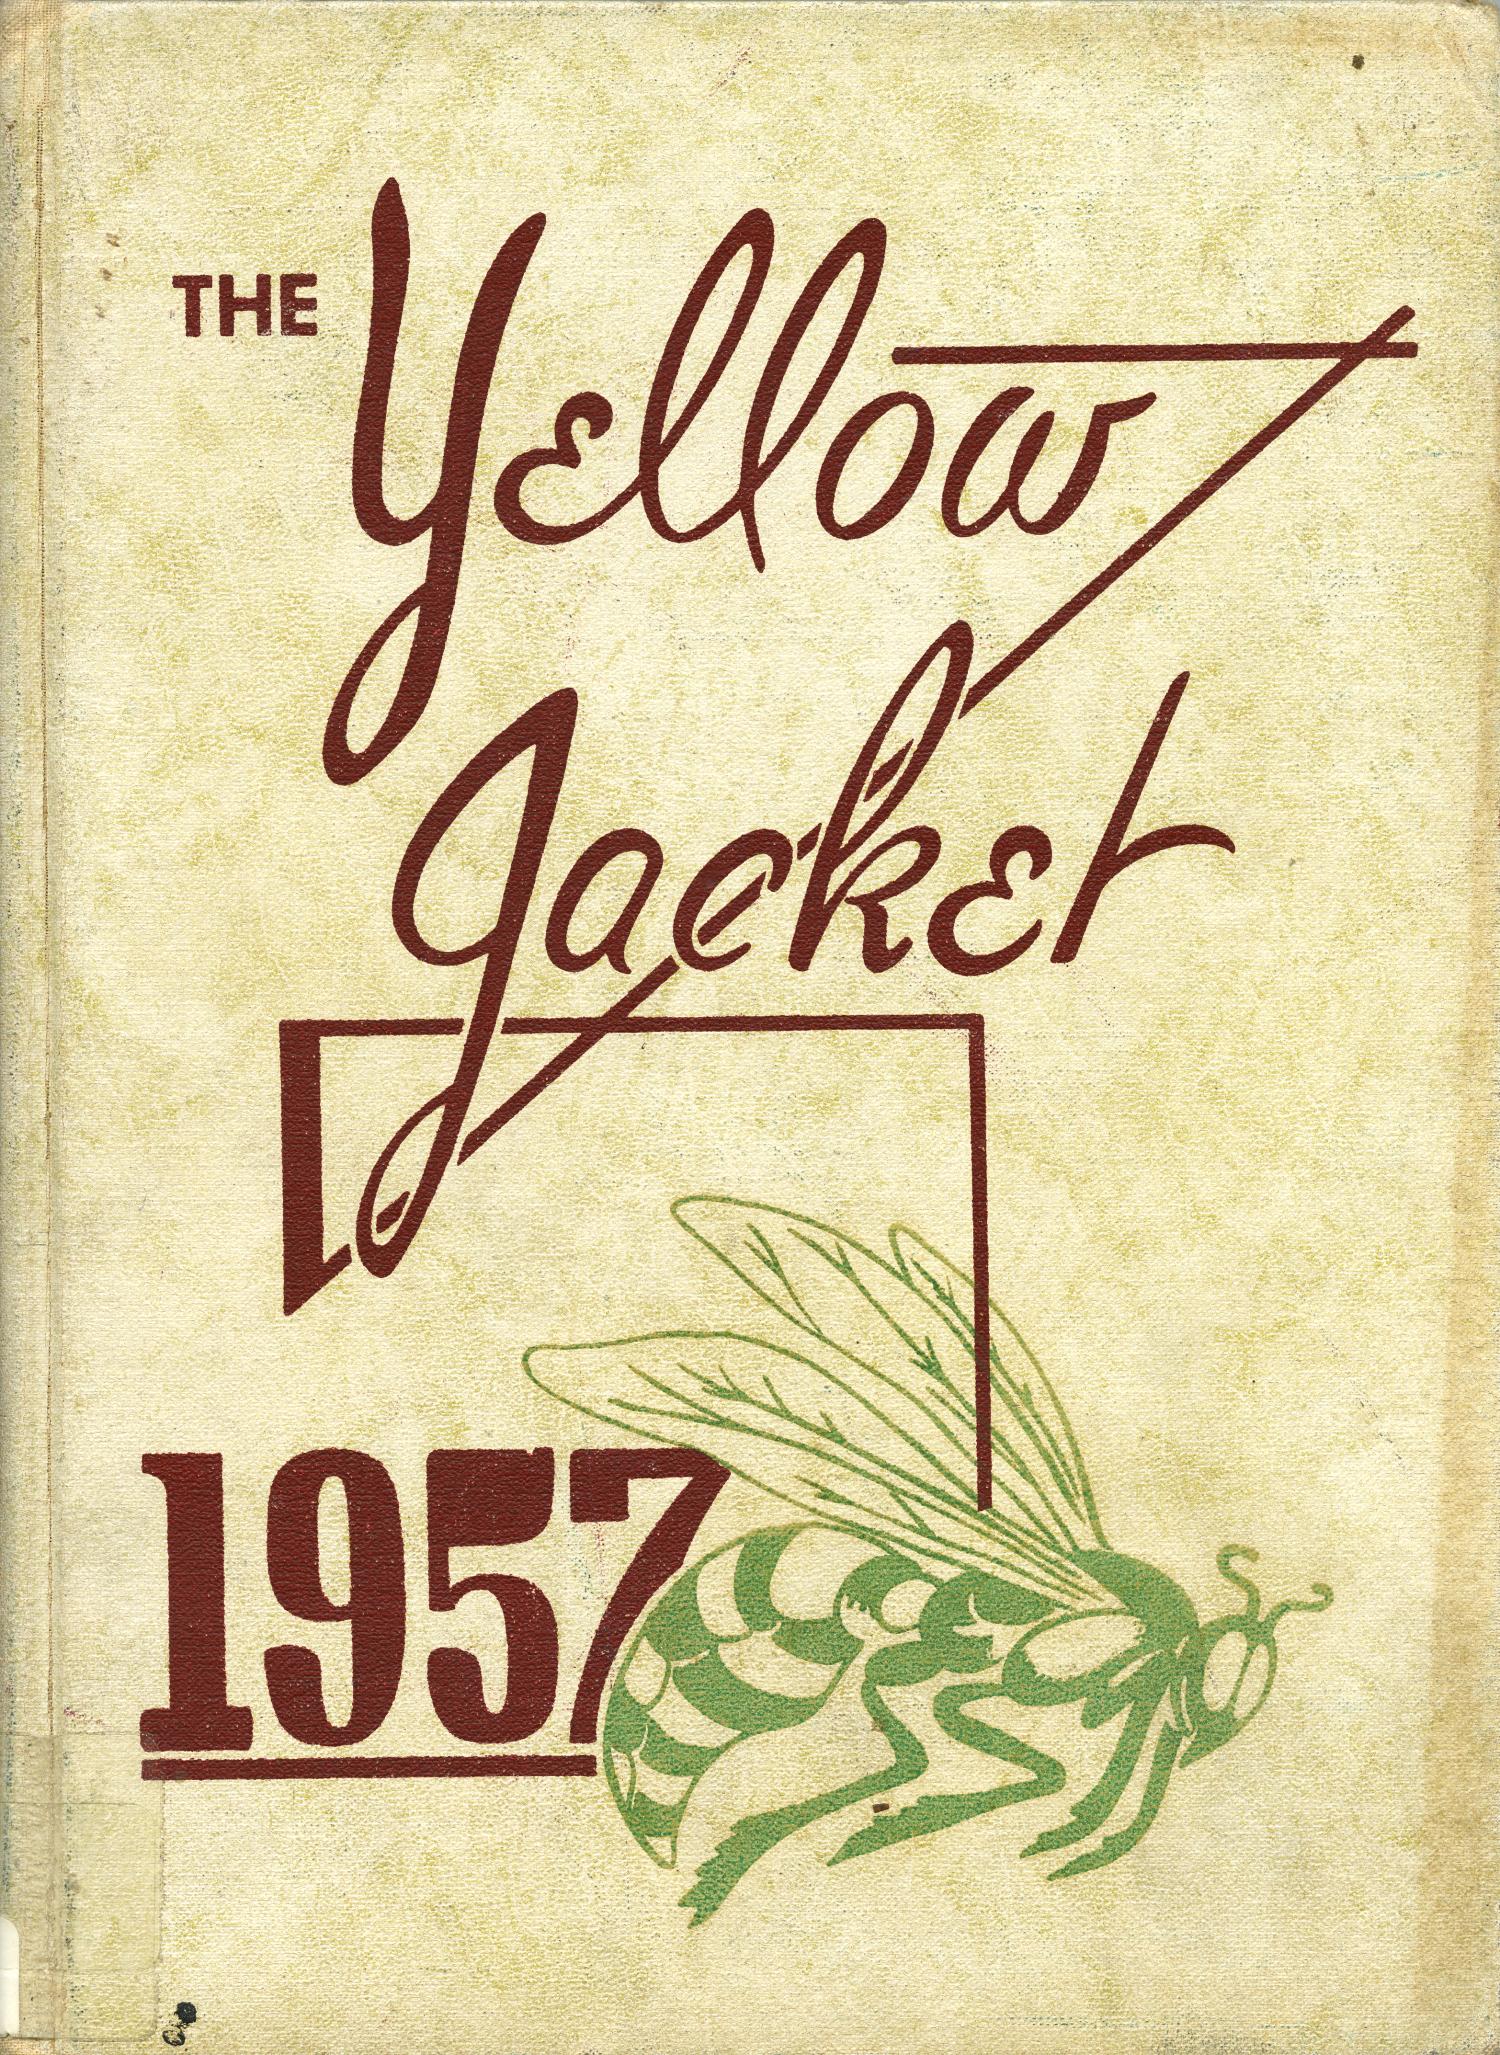 The Yellow Jacket, Yearbook of Thomas Jefferson High School, 1957
                                                
                                                    Front Cover
                                                